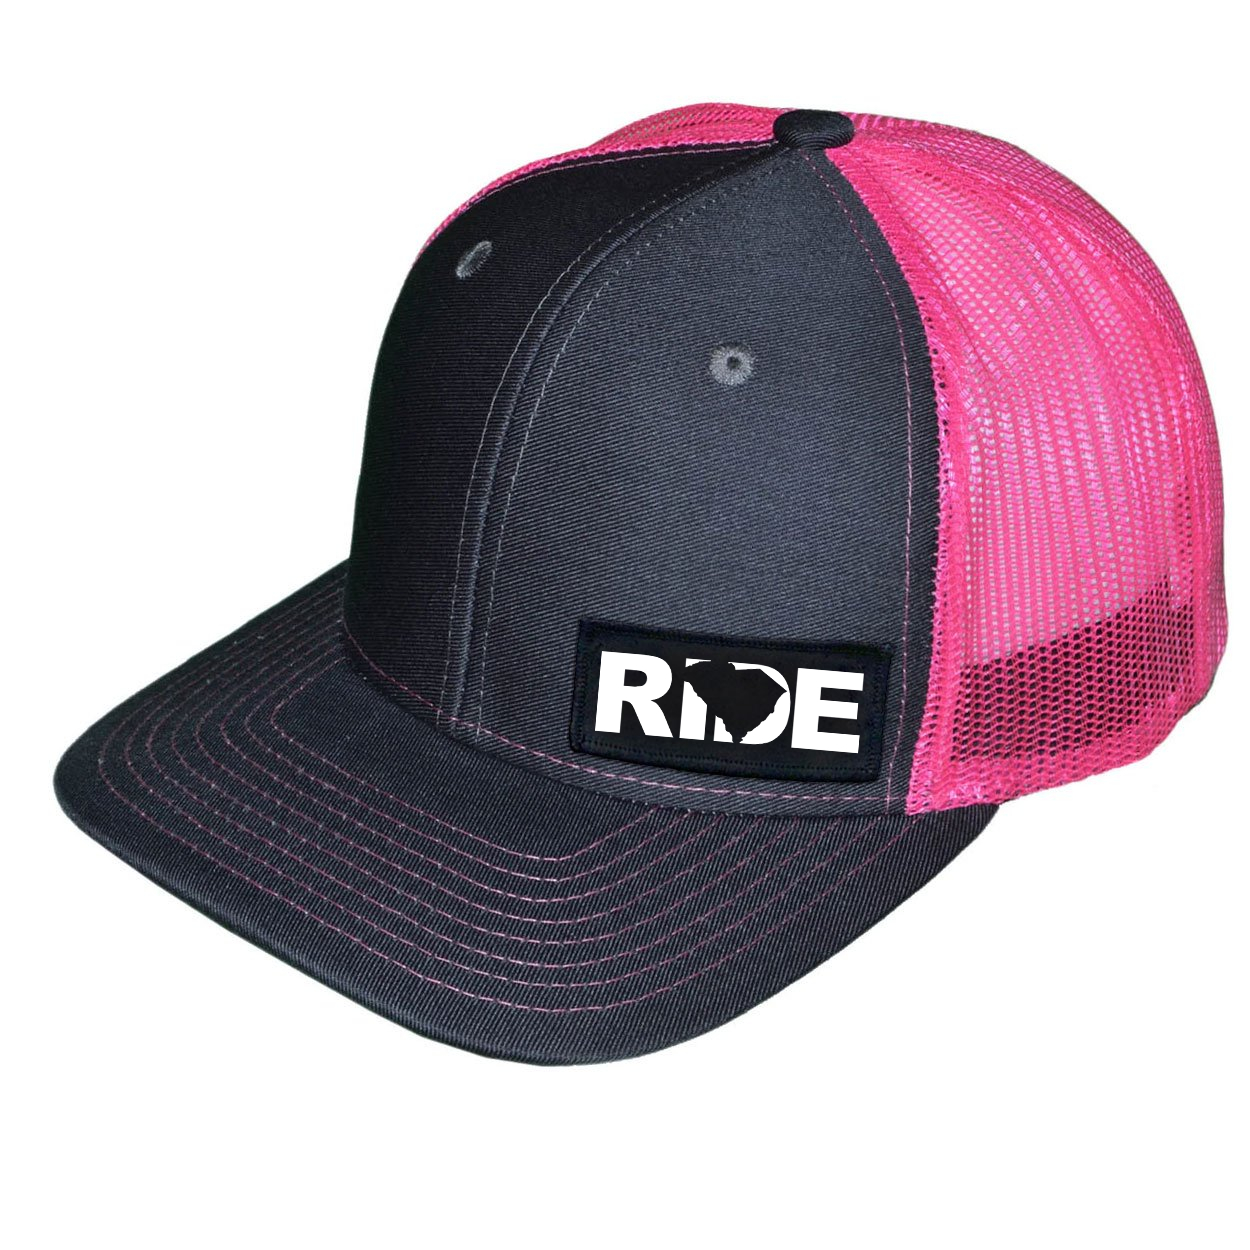 Ride South Carolina Night Out Woven Patch Snapback Trucker Hat Charcoal/Neon Pink (White Logo)